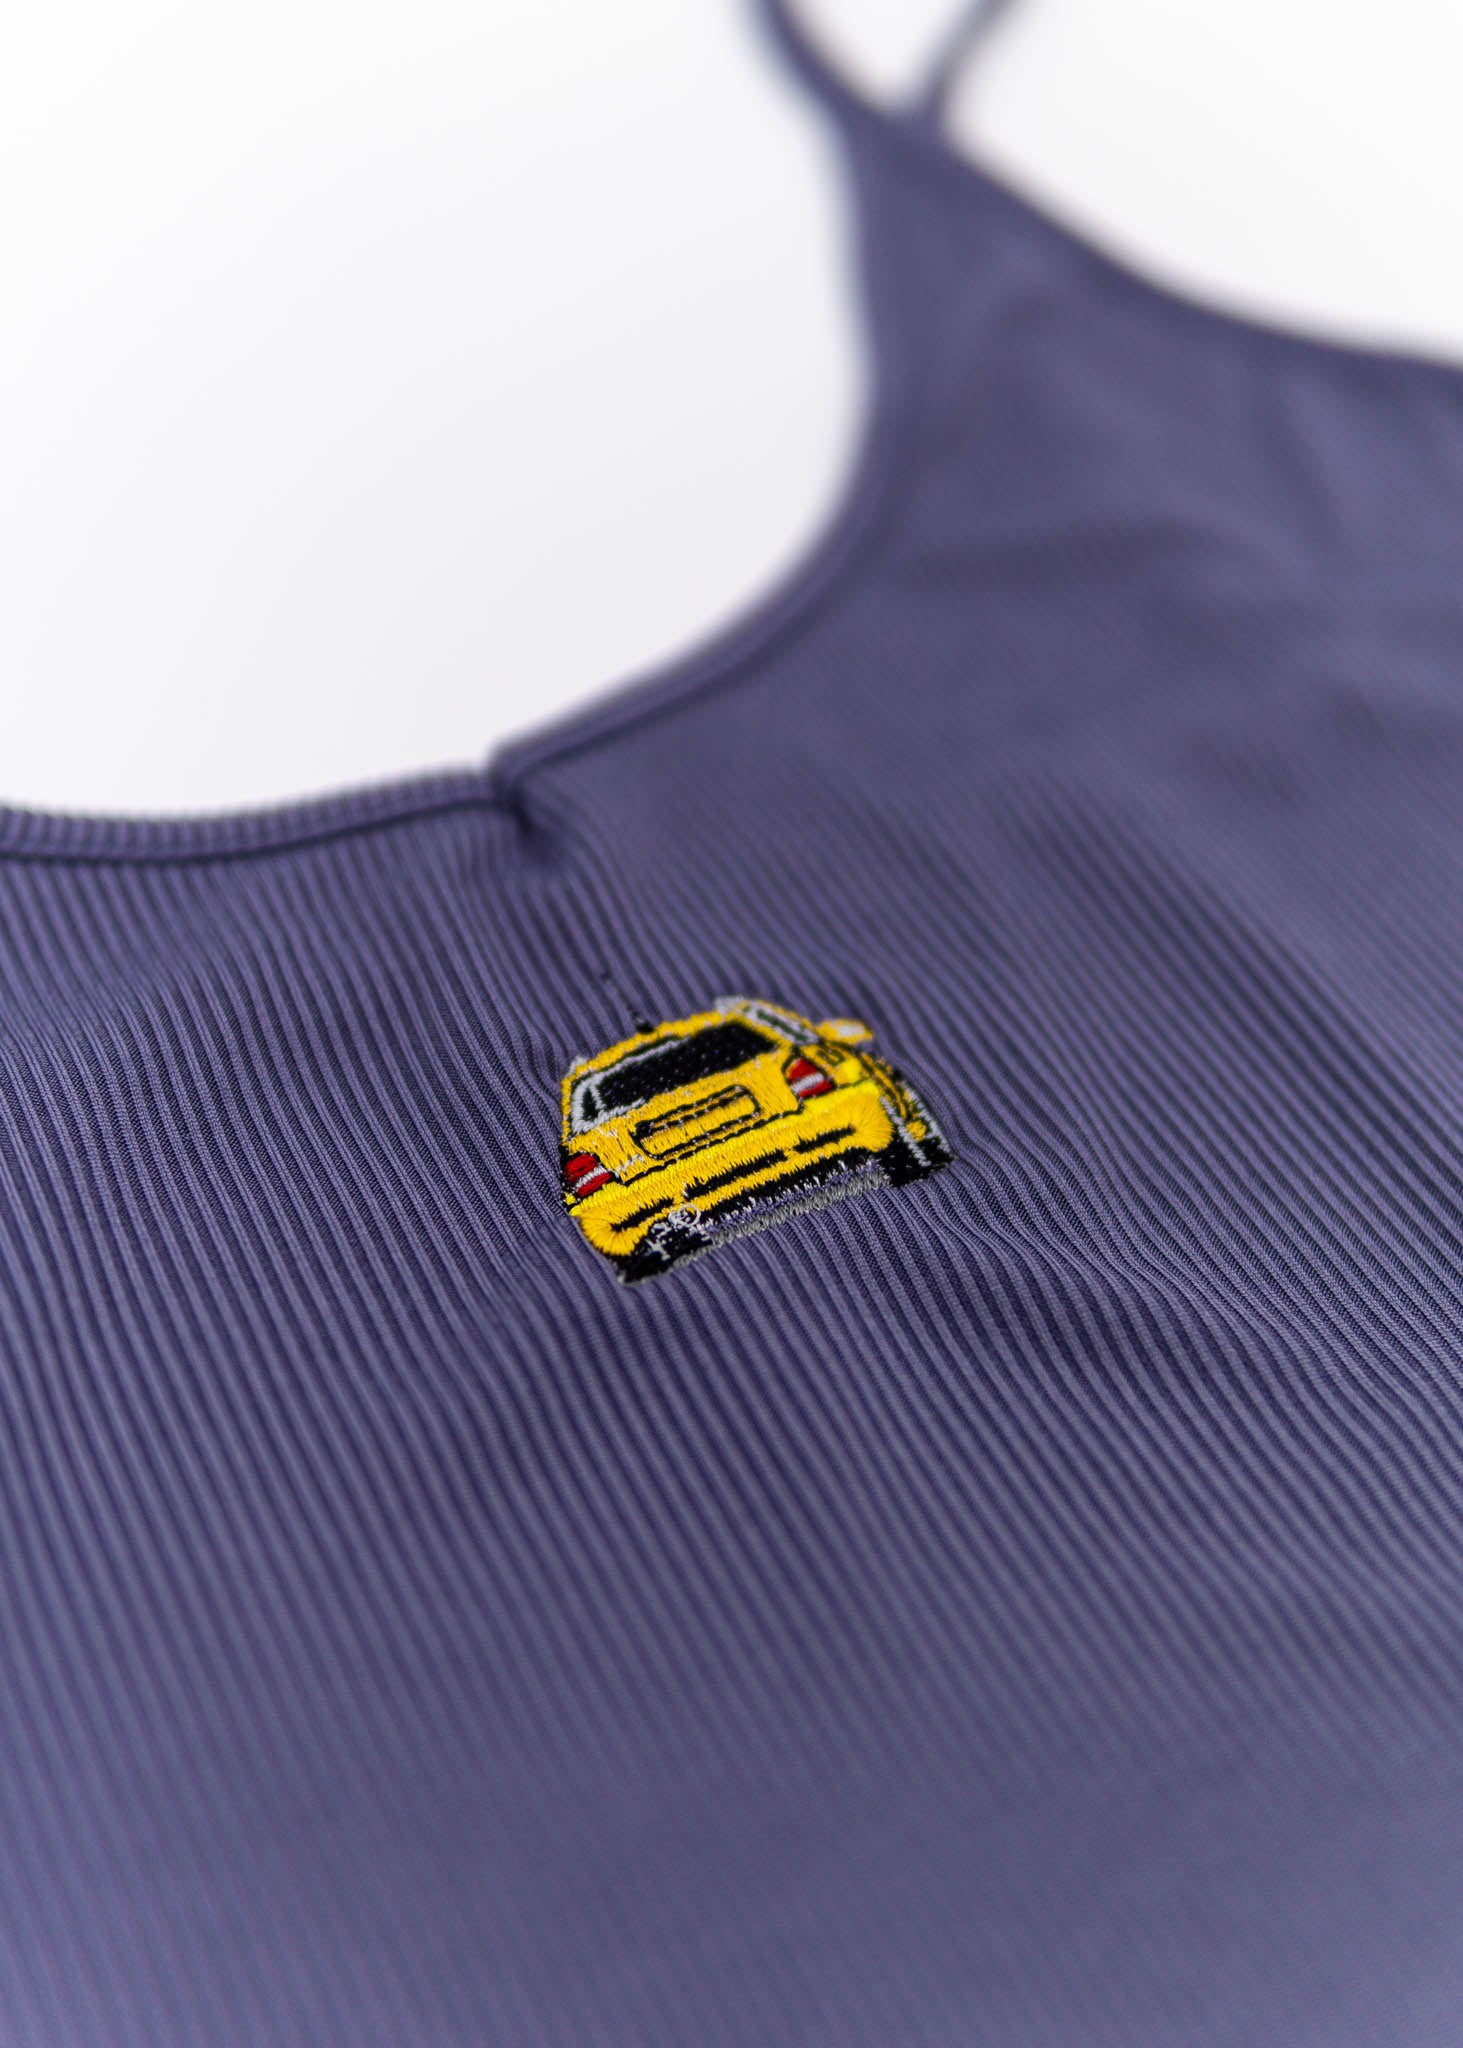 A purple Audi crop top for plus size women. Photo is a close up view of the top with an embroidered Imola Yellow Audi B5 RS4. Fabric composition is polyester, and spandex. The material is stretchy, ribbed, and non-transparent. The style of this shirt is sleeveless, with a deep neckline.